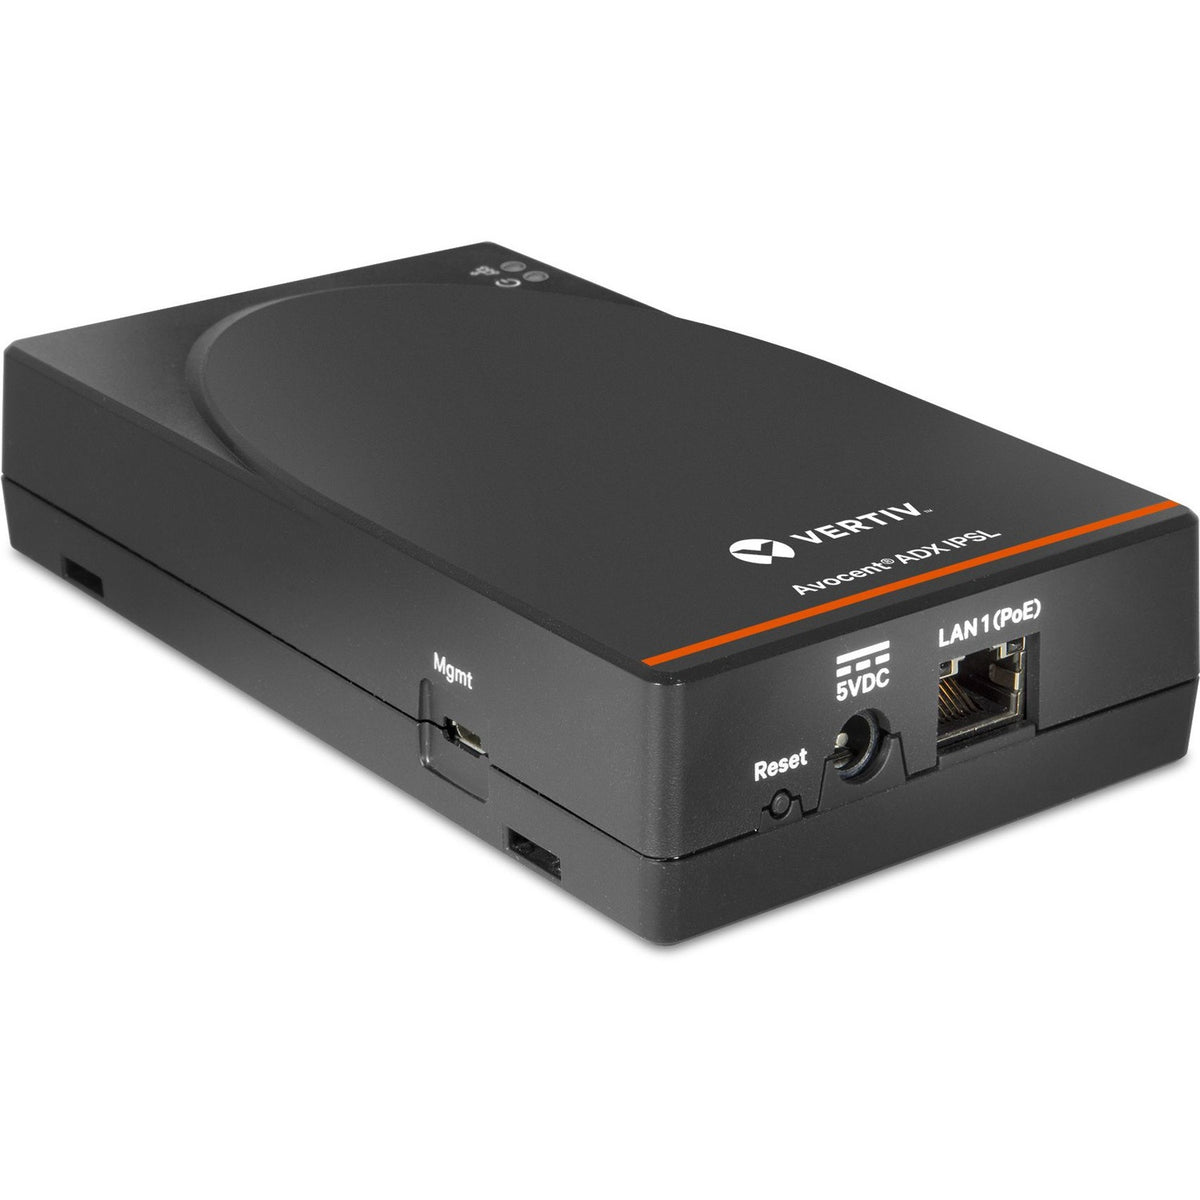 Vertiv Avocent IPSL IP Serial Device | IT Management | Remote Serial Access | Serial over IP (ADX-IPSL104-400) - ADX-IPSL104-400